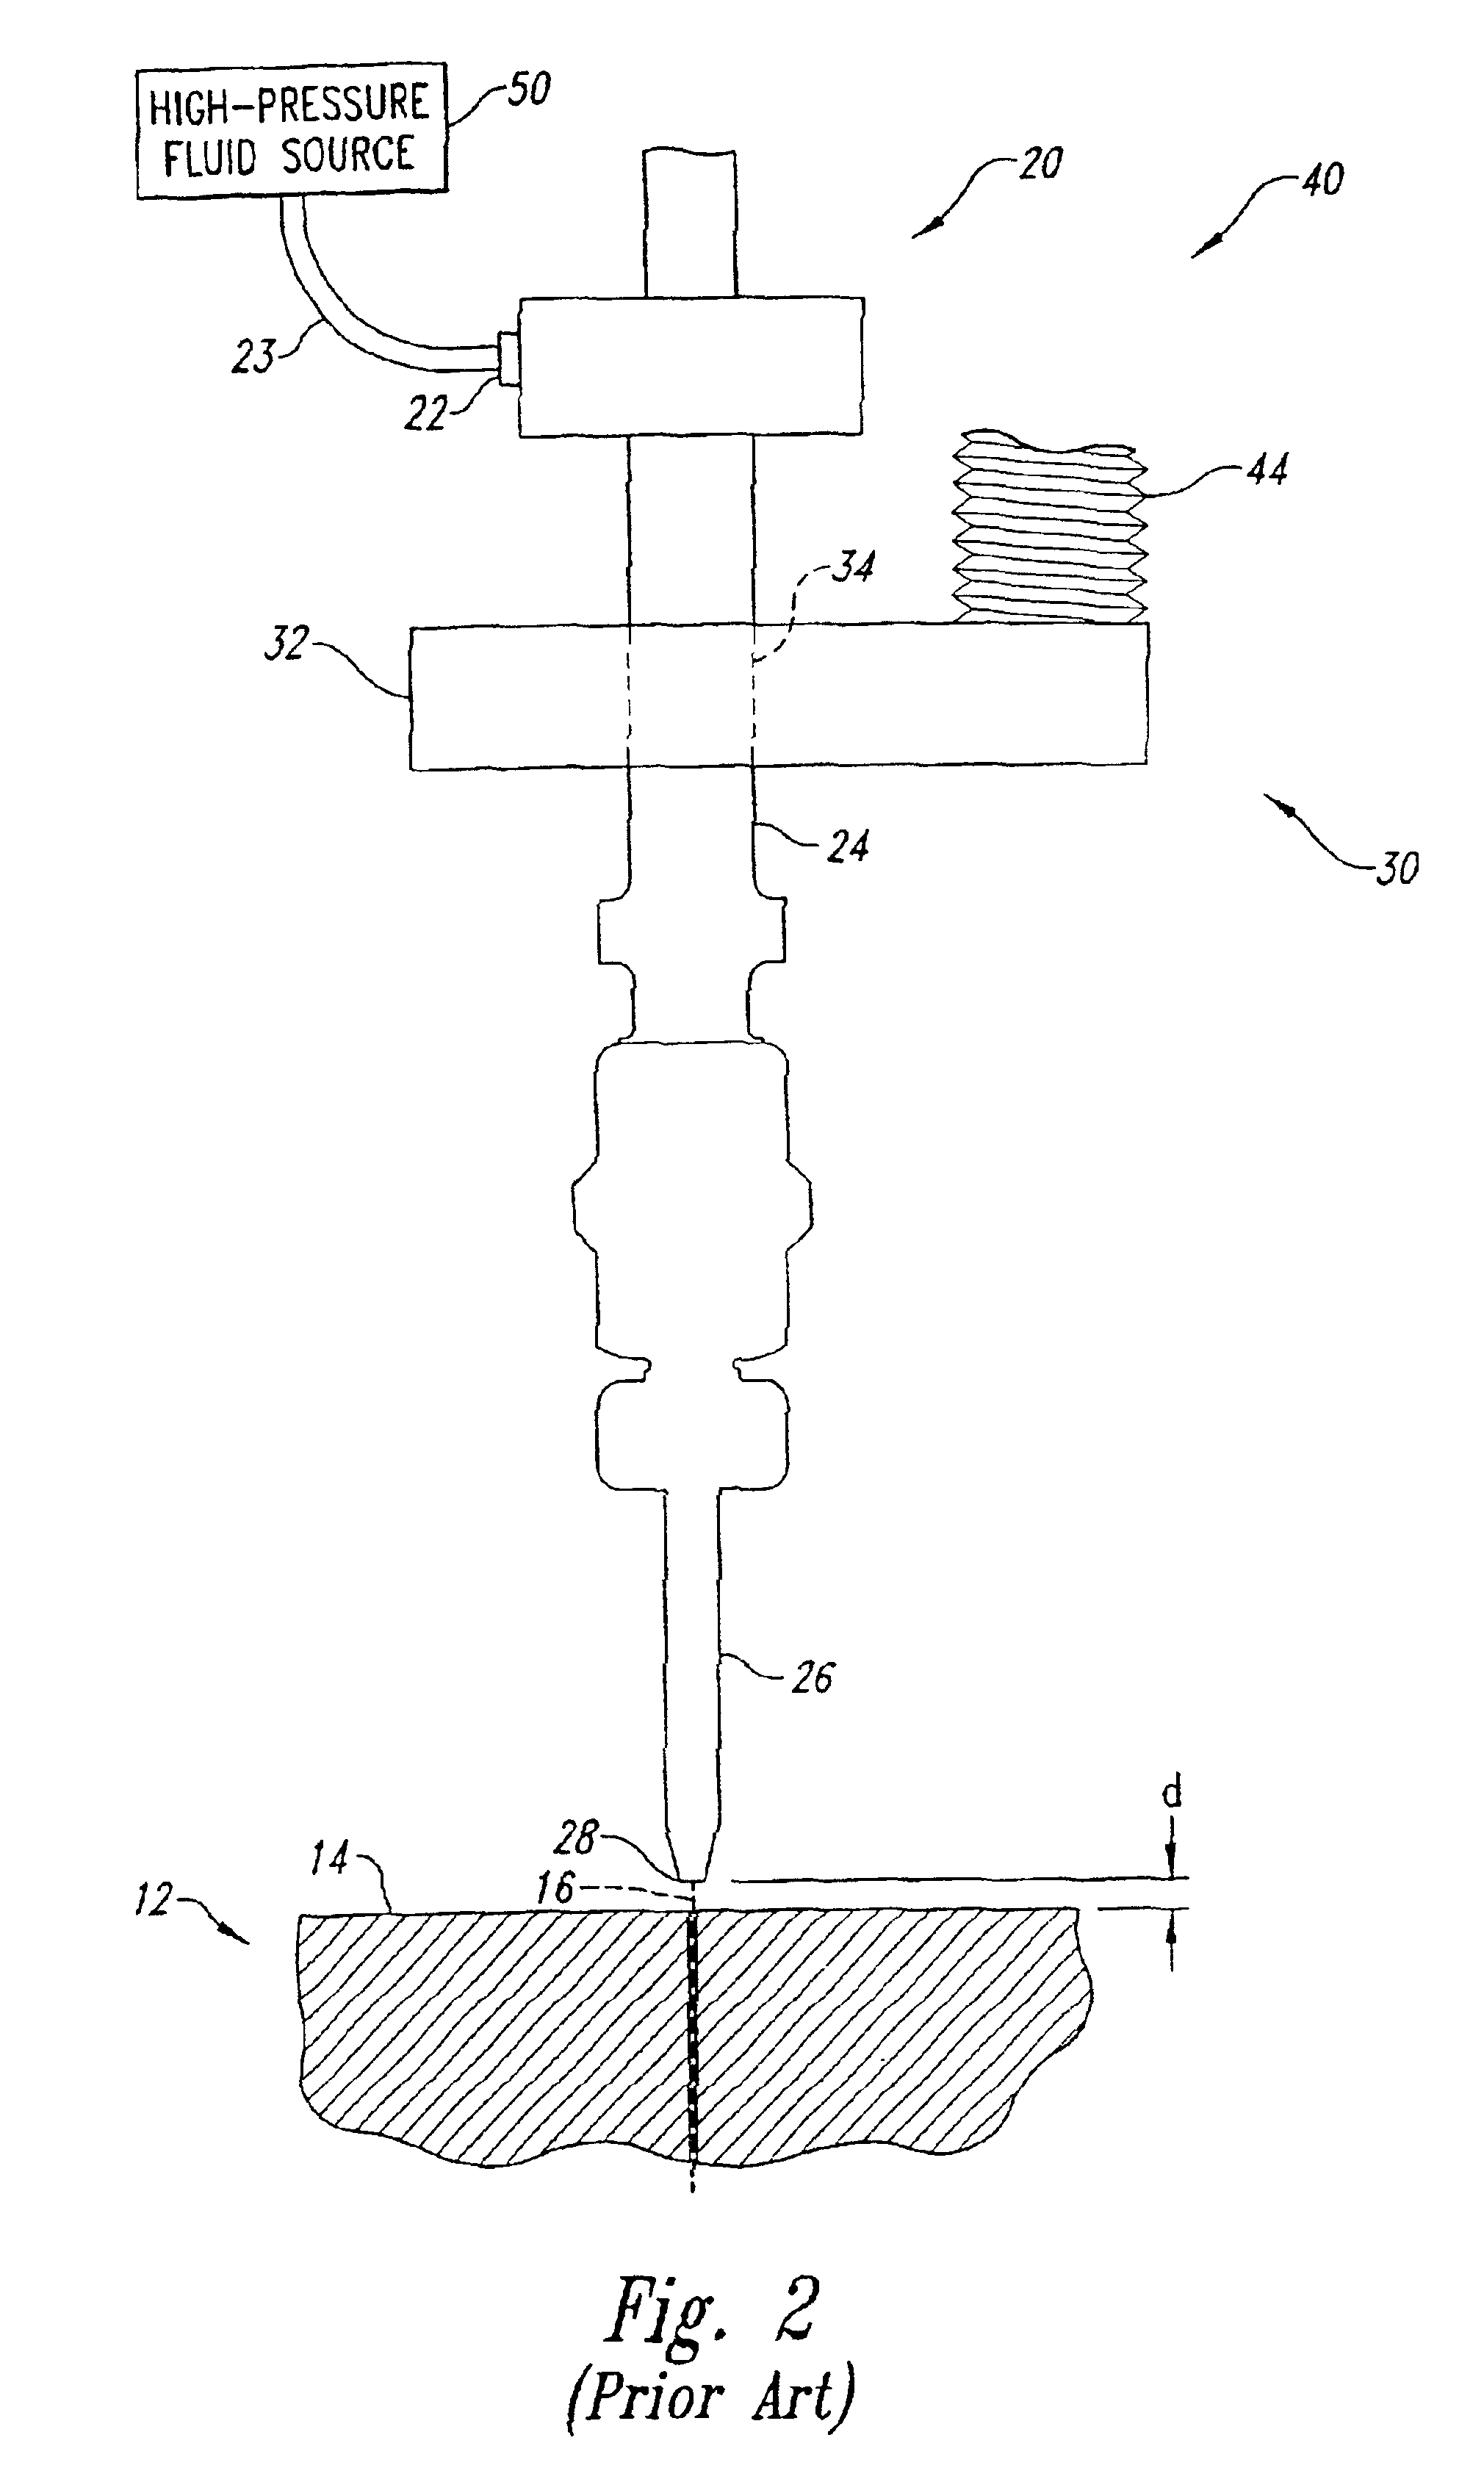 Apparatus and methods for Z-axis control and collision detection and recovery for waterjet cutting systems